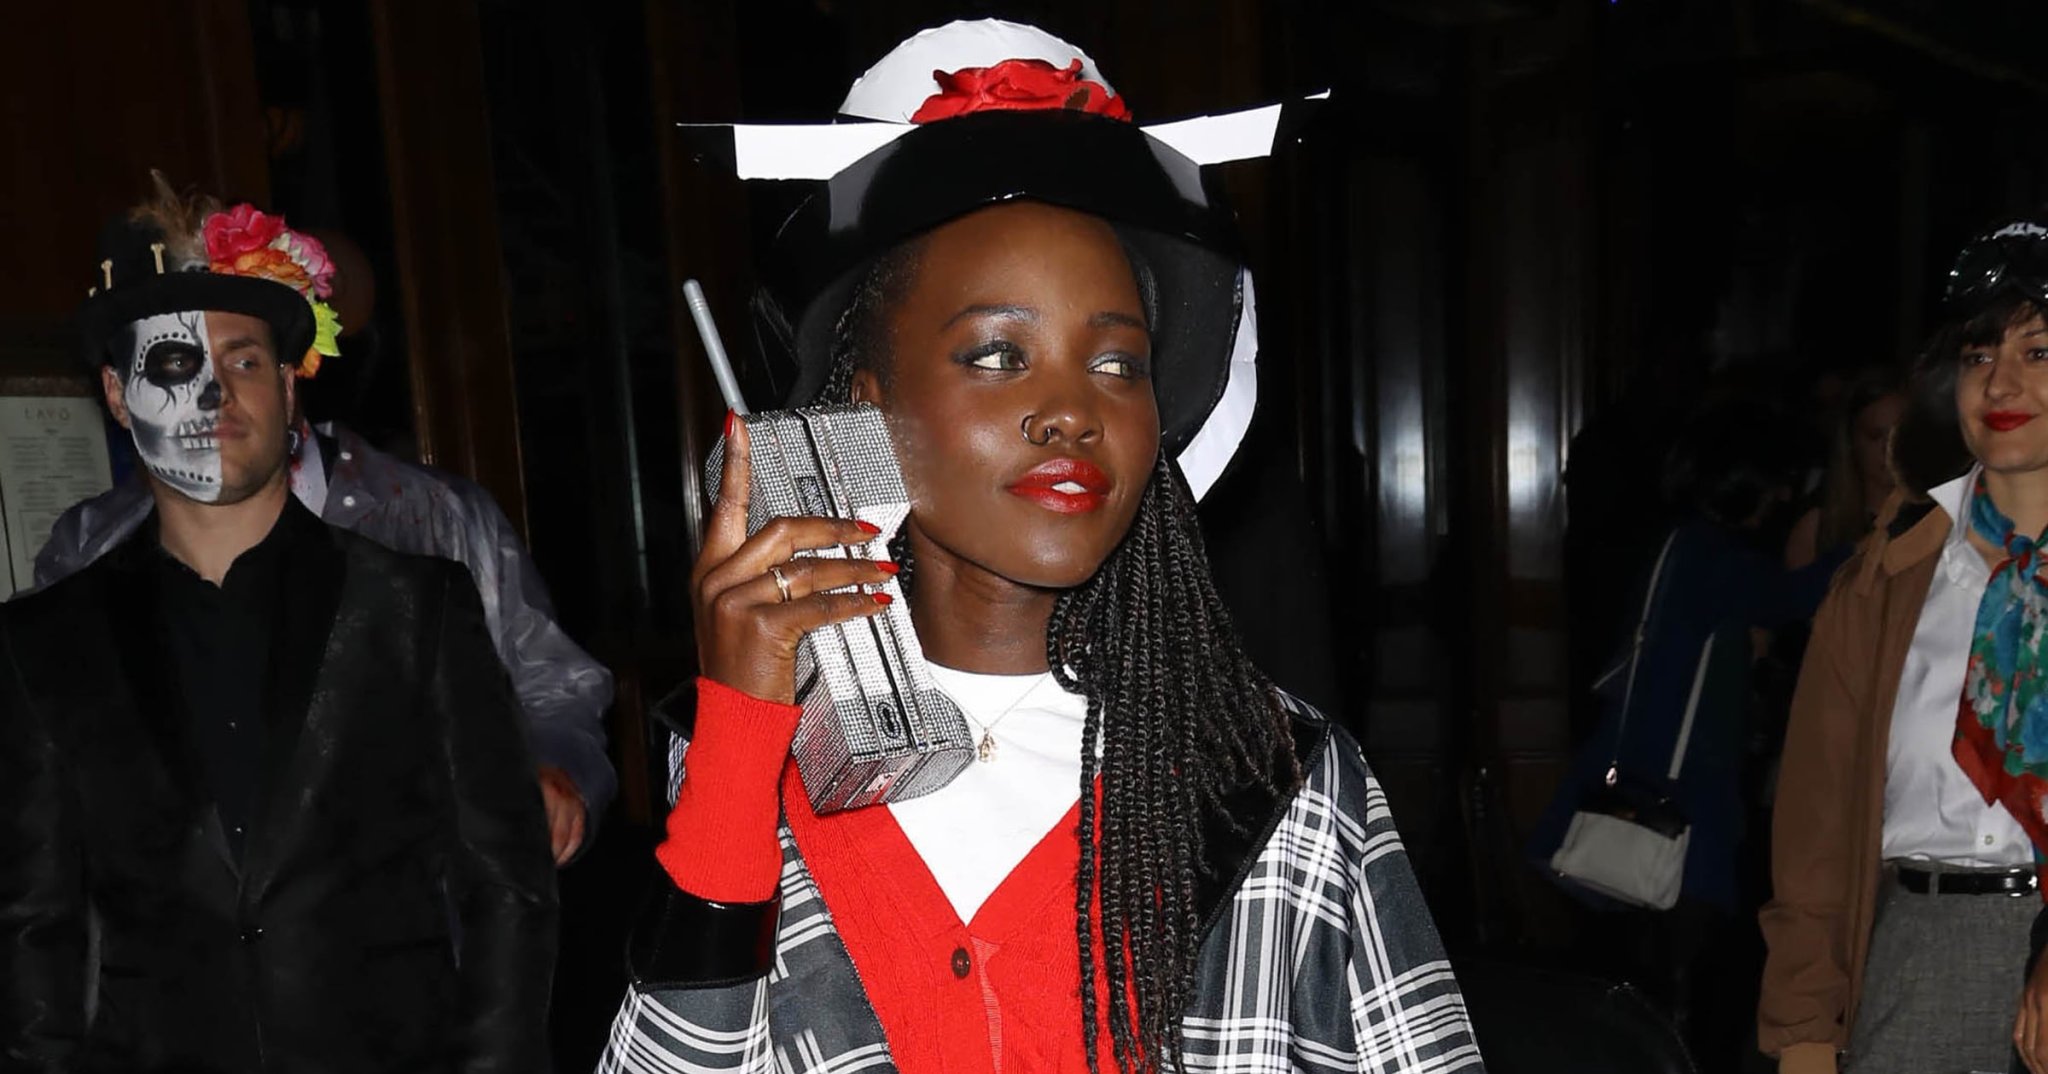 65 Work-Appropriate Halloween Costumes For the Office